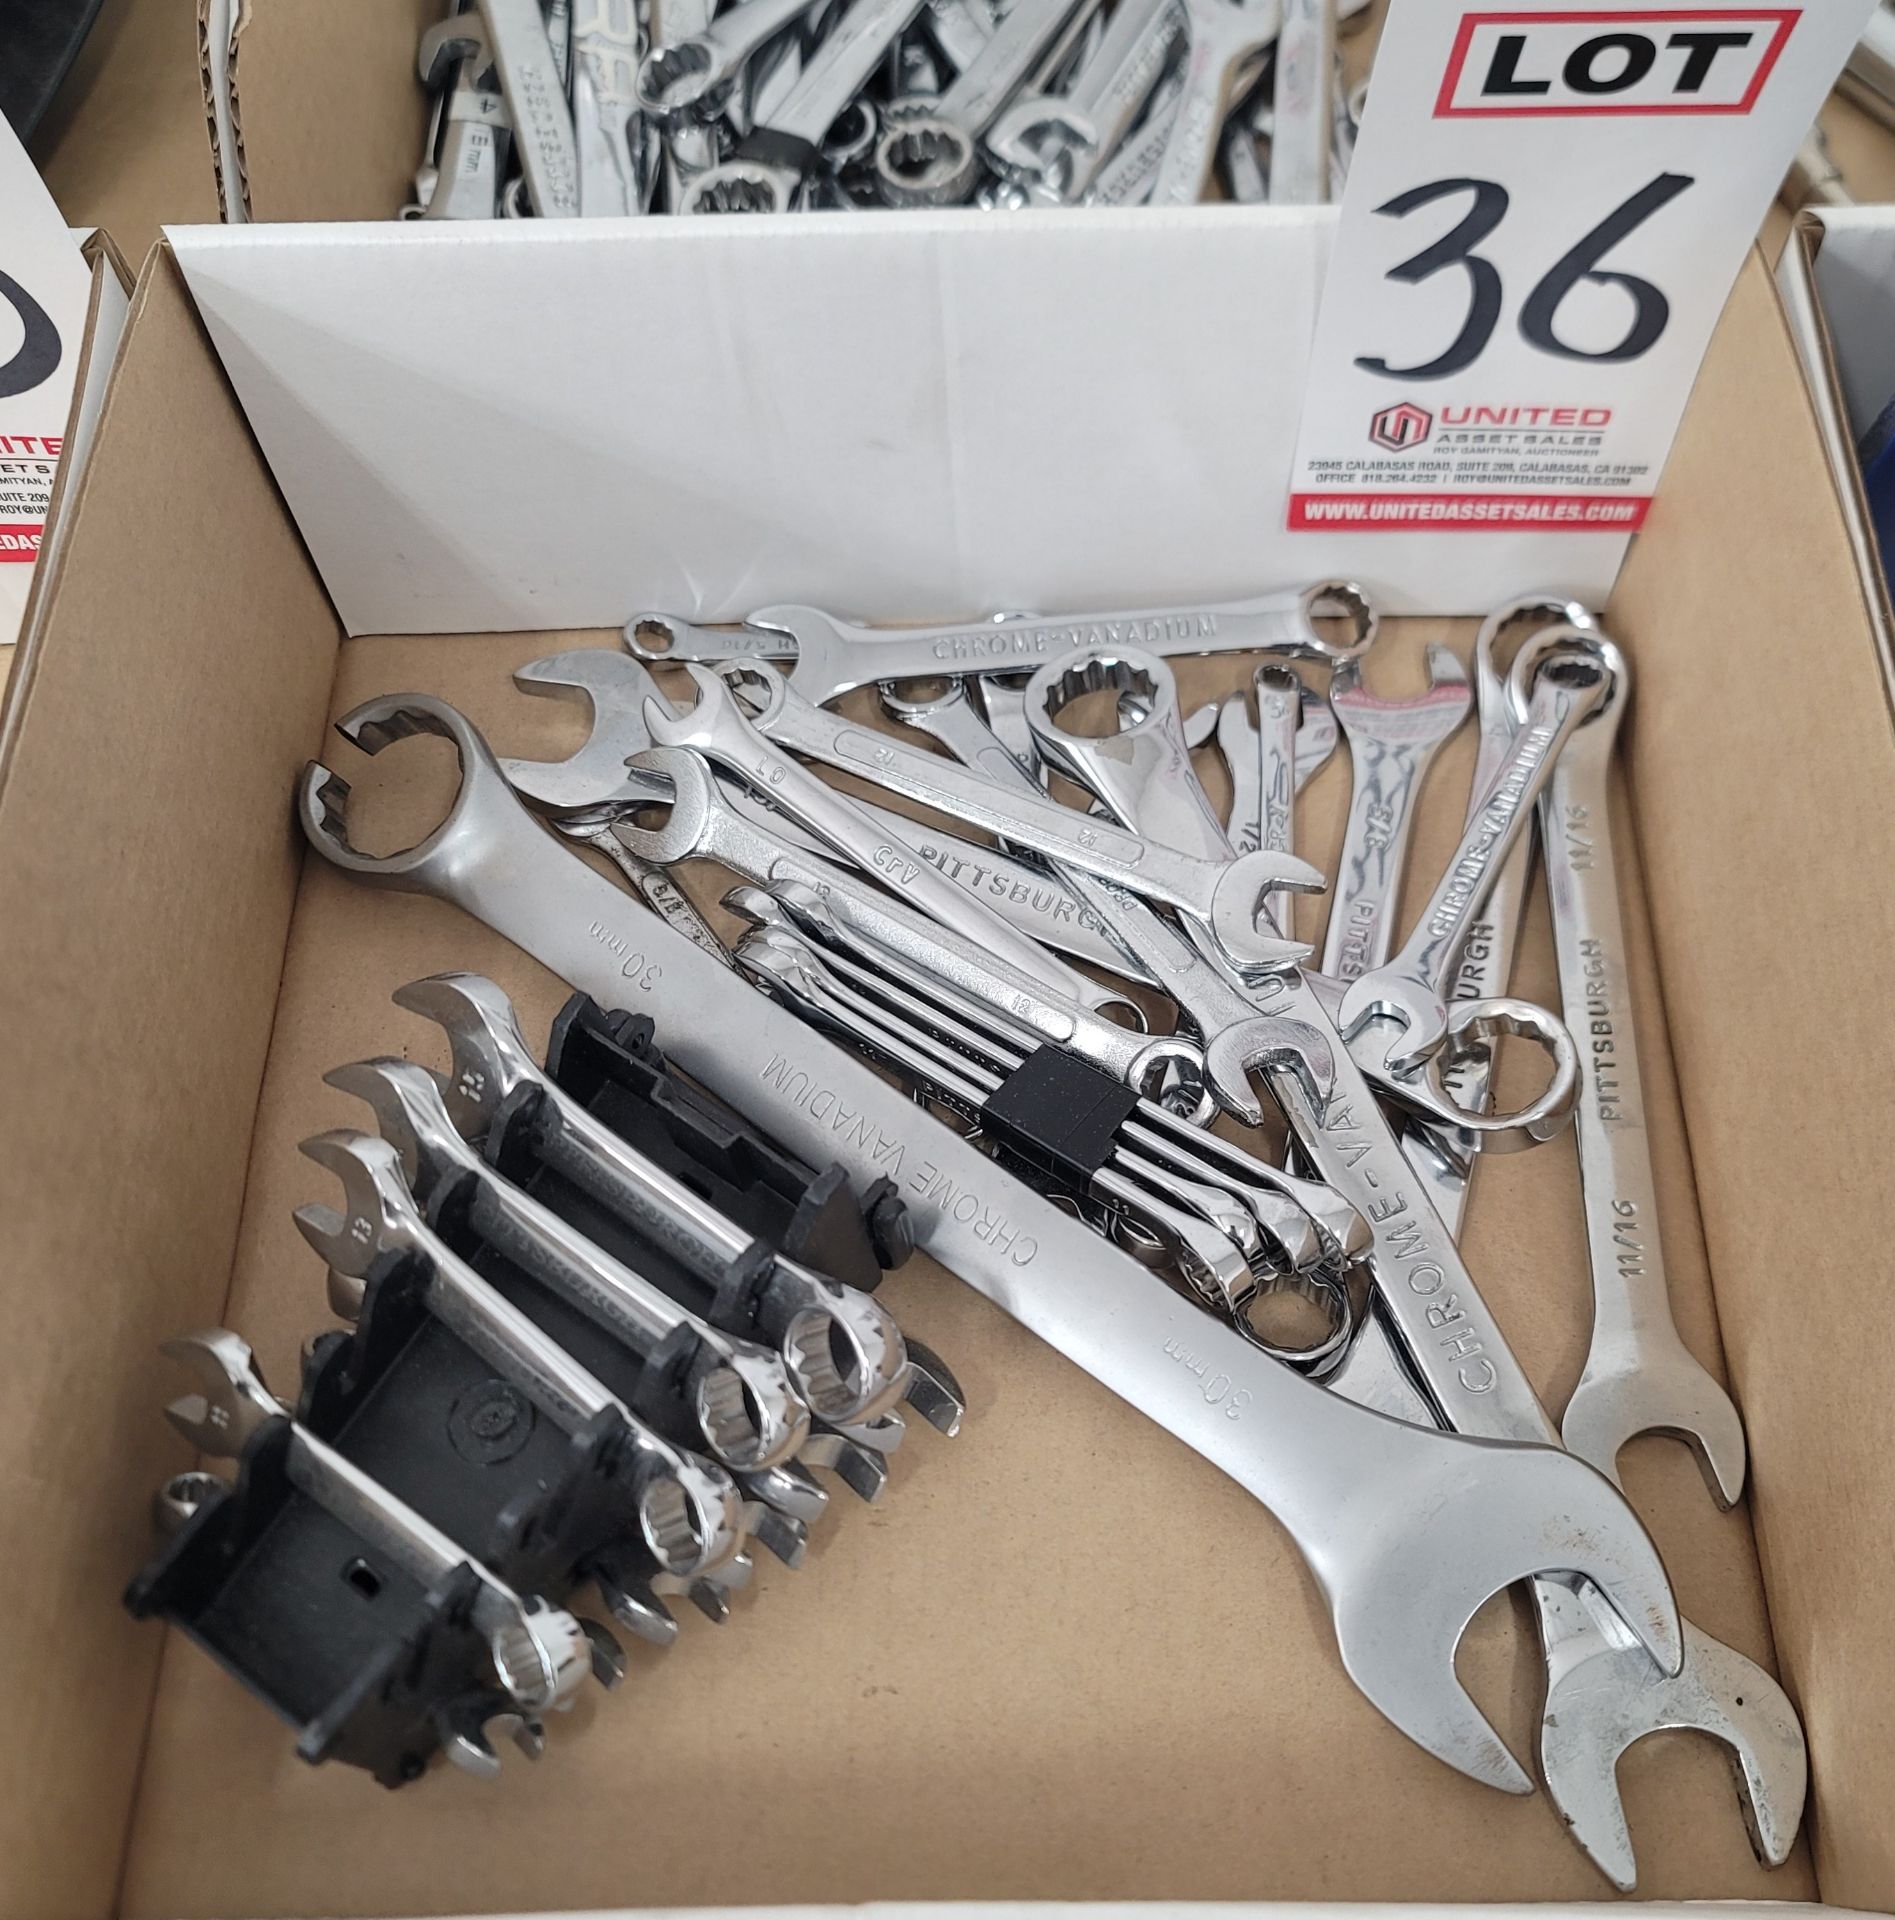 LOT - COMBINATION WRENCHES, METRIC AND STANDARD